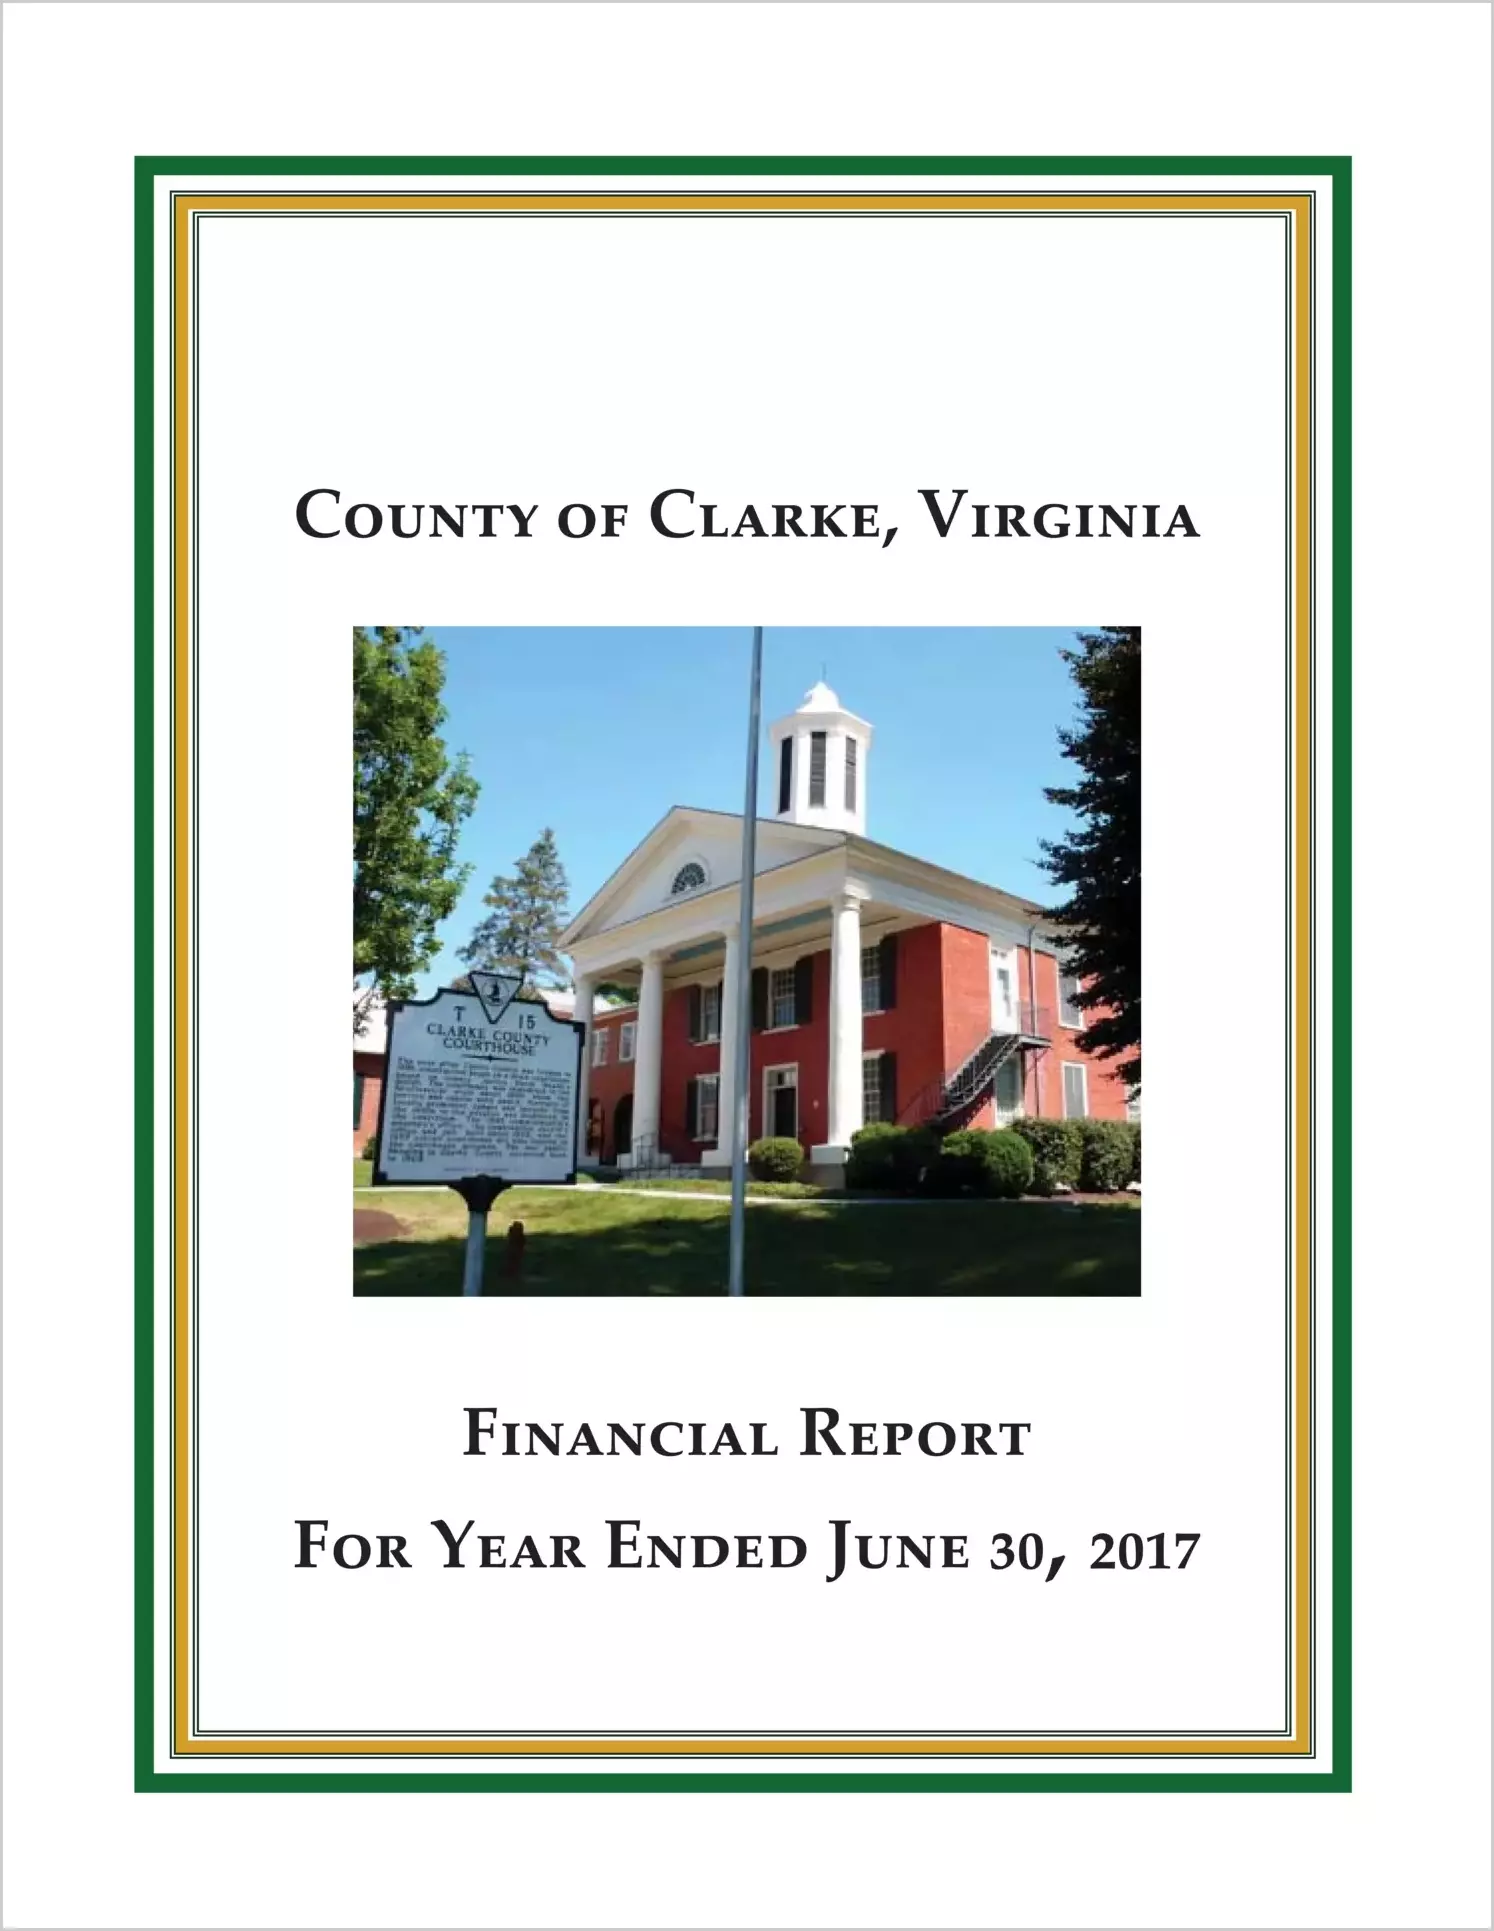 2017 Annual Financial Report for County of Clarke